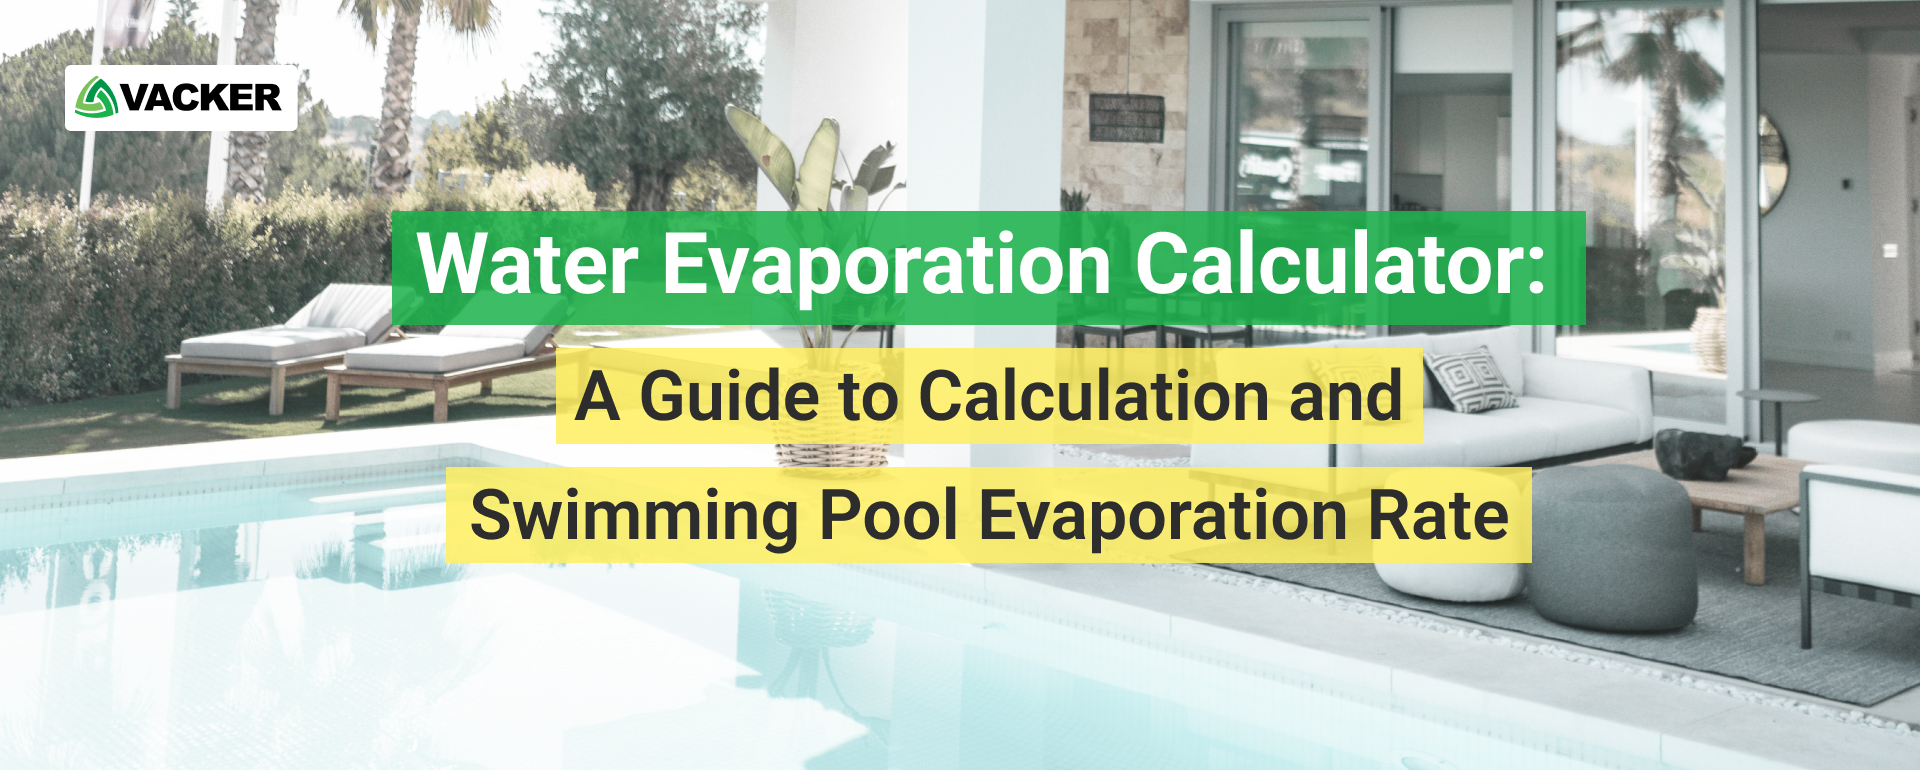 Water Evaporation Calculator: A Guide to Calculation and Swimming Pool Evaporation Rate